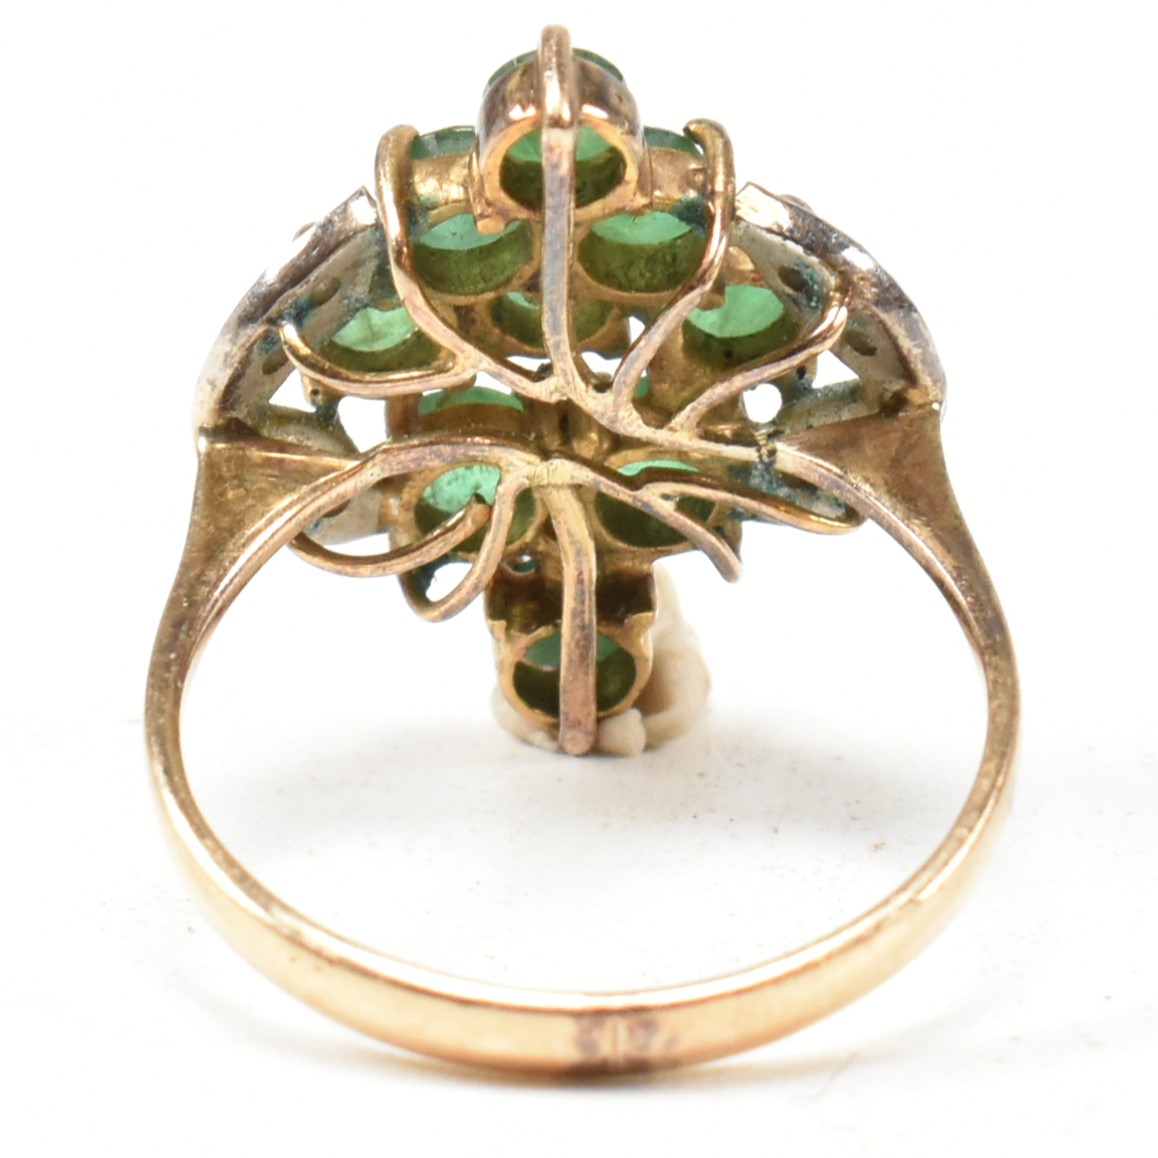 EMERALD & DIAMOND CLUSTER RING - Image 3 of 8